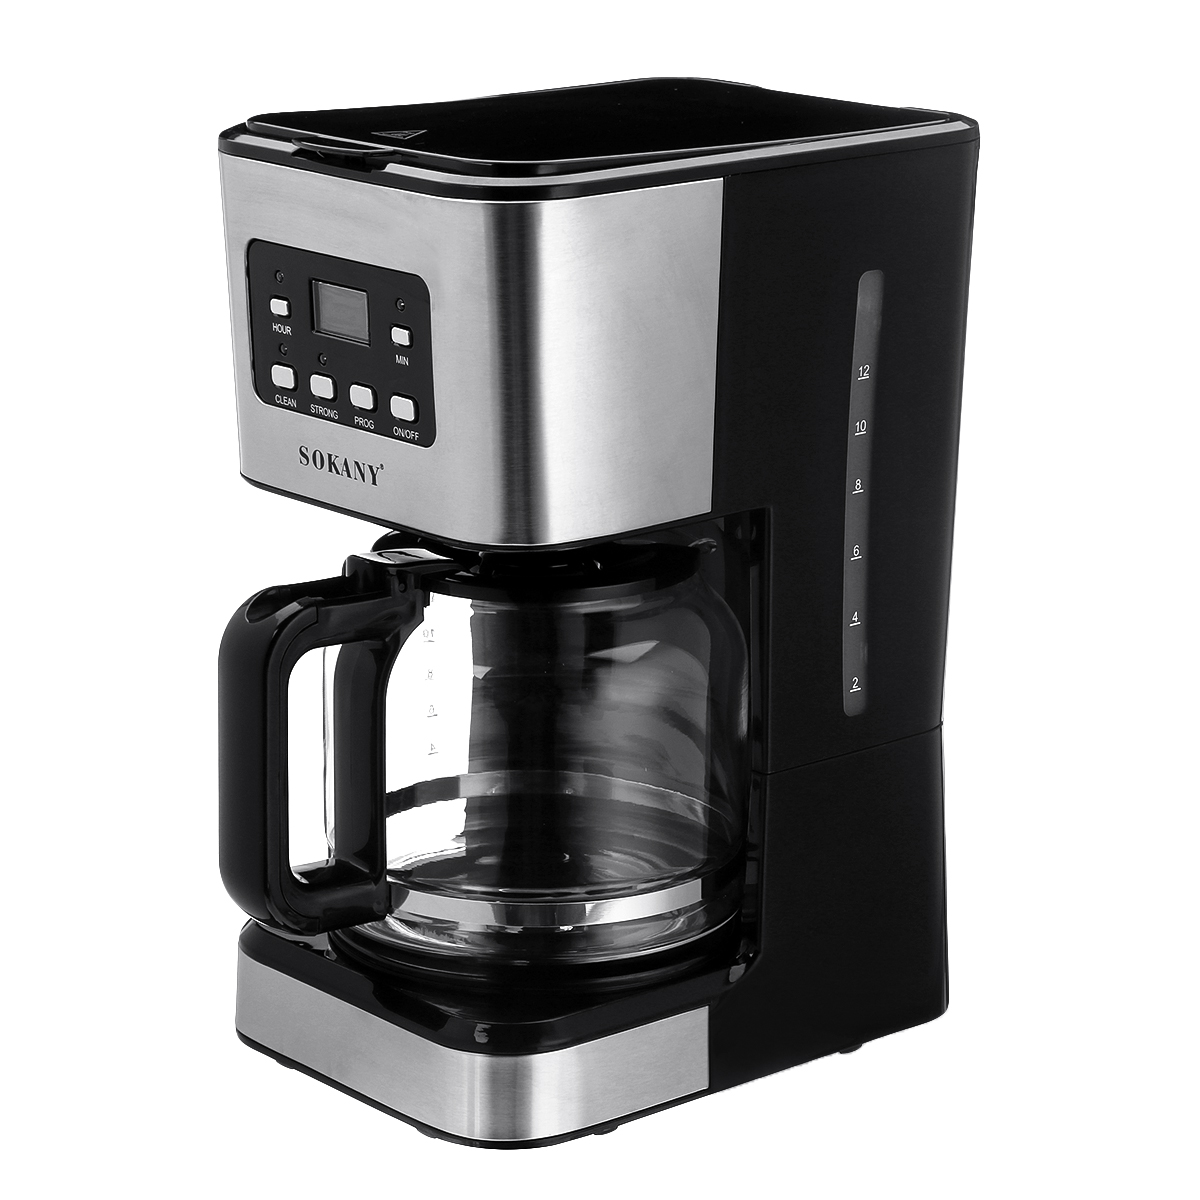 220V Coffee Maker 12 Cups 1.5L Semi-Automatic Espresso Making Machine Stainless Steel 34